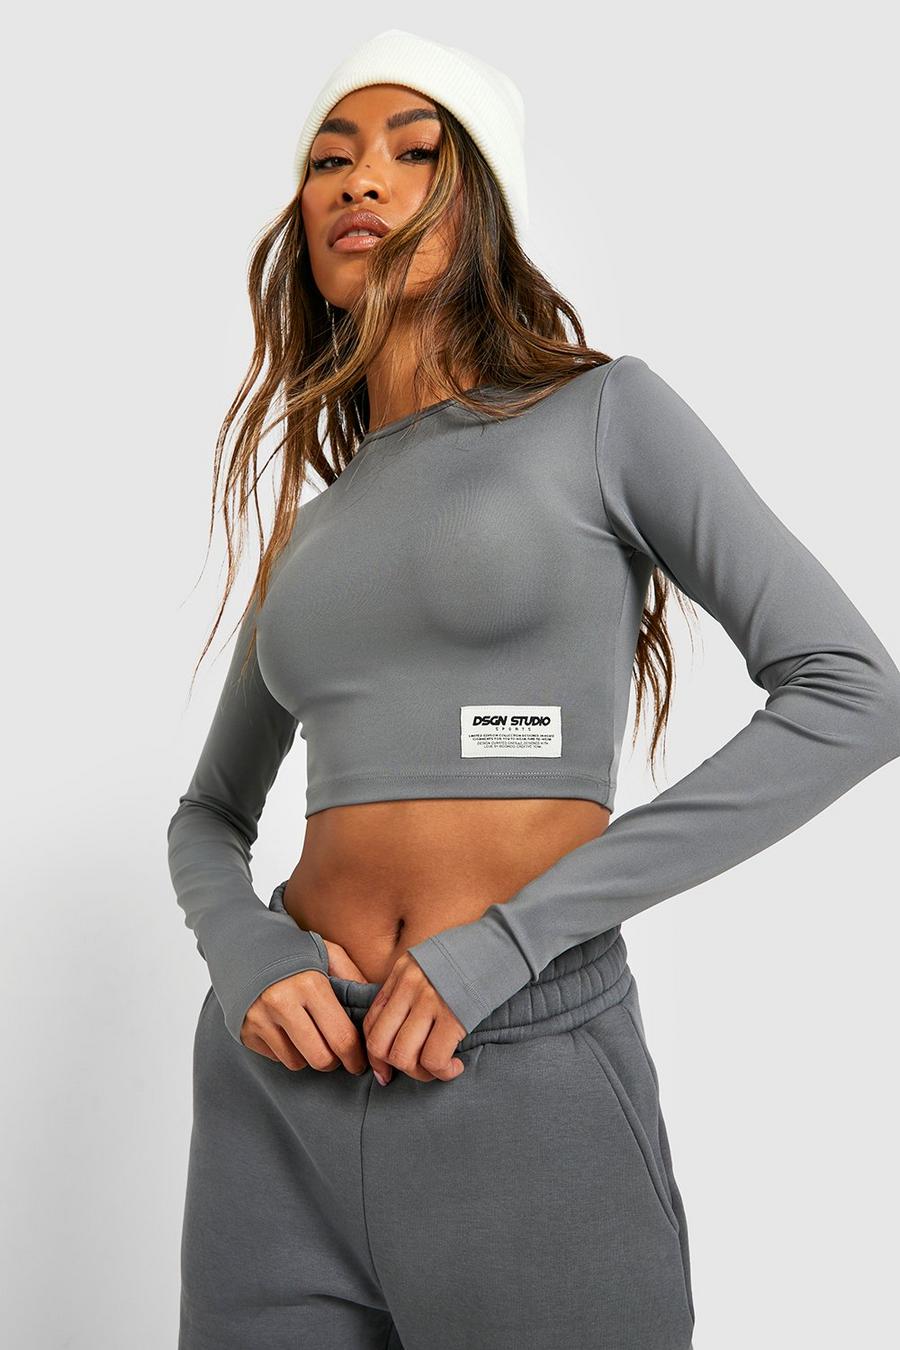 Charcoal grey Woven Label Long Sleeve Active Gym Crop Top